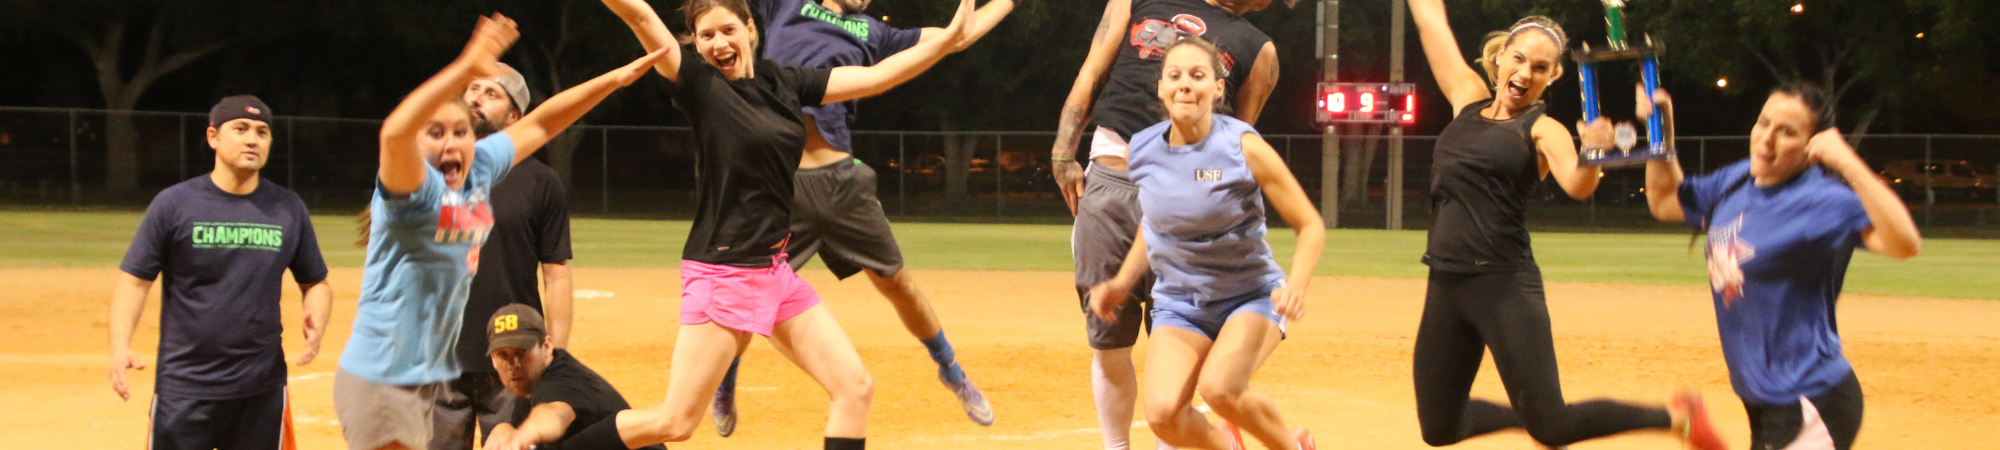 players on a softball field after dark playing kickball. In the foreground on man, wearing neon green shorts and pink shirt is sliding into home while another man lunges to tag him out.